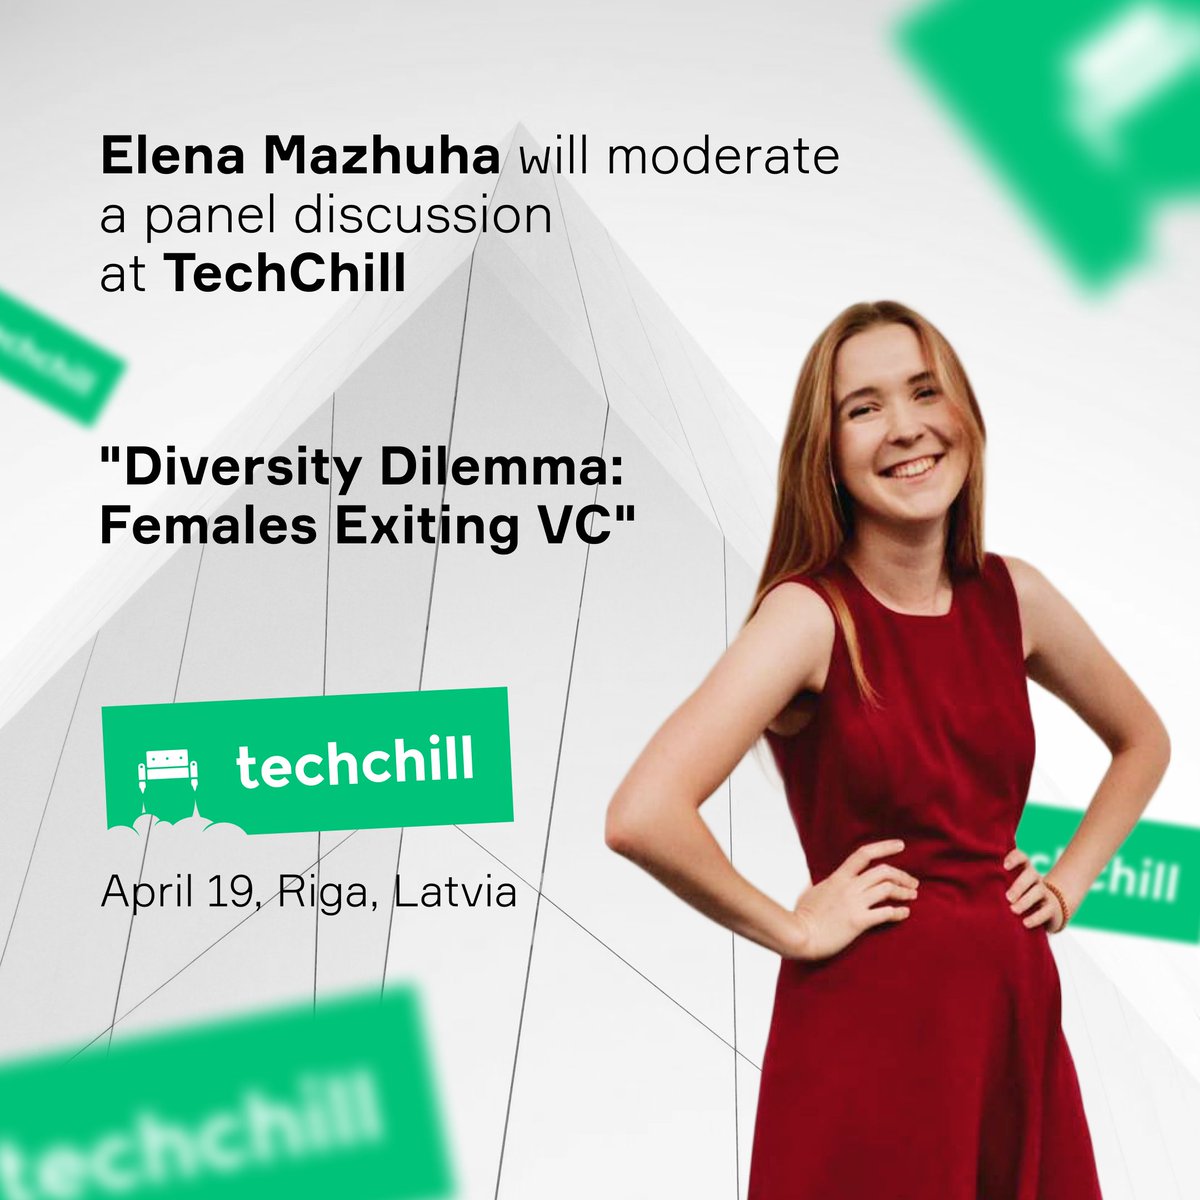 If you’re going to #TechChill2024, attend the panel moderated by F1V Partner @lenamazhuha on the Muse stage🔥

She’ll chat with:
🟩 @VictoriaTrimbel, Managing Director at @CoinvestCap 
🟩 @MilanaSlobtcova, Principal at @UnderlineVC 
🟩 @LindaVoeras, Investor at @karmaventures